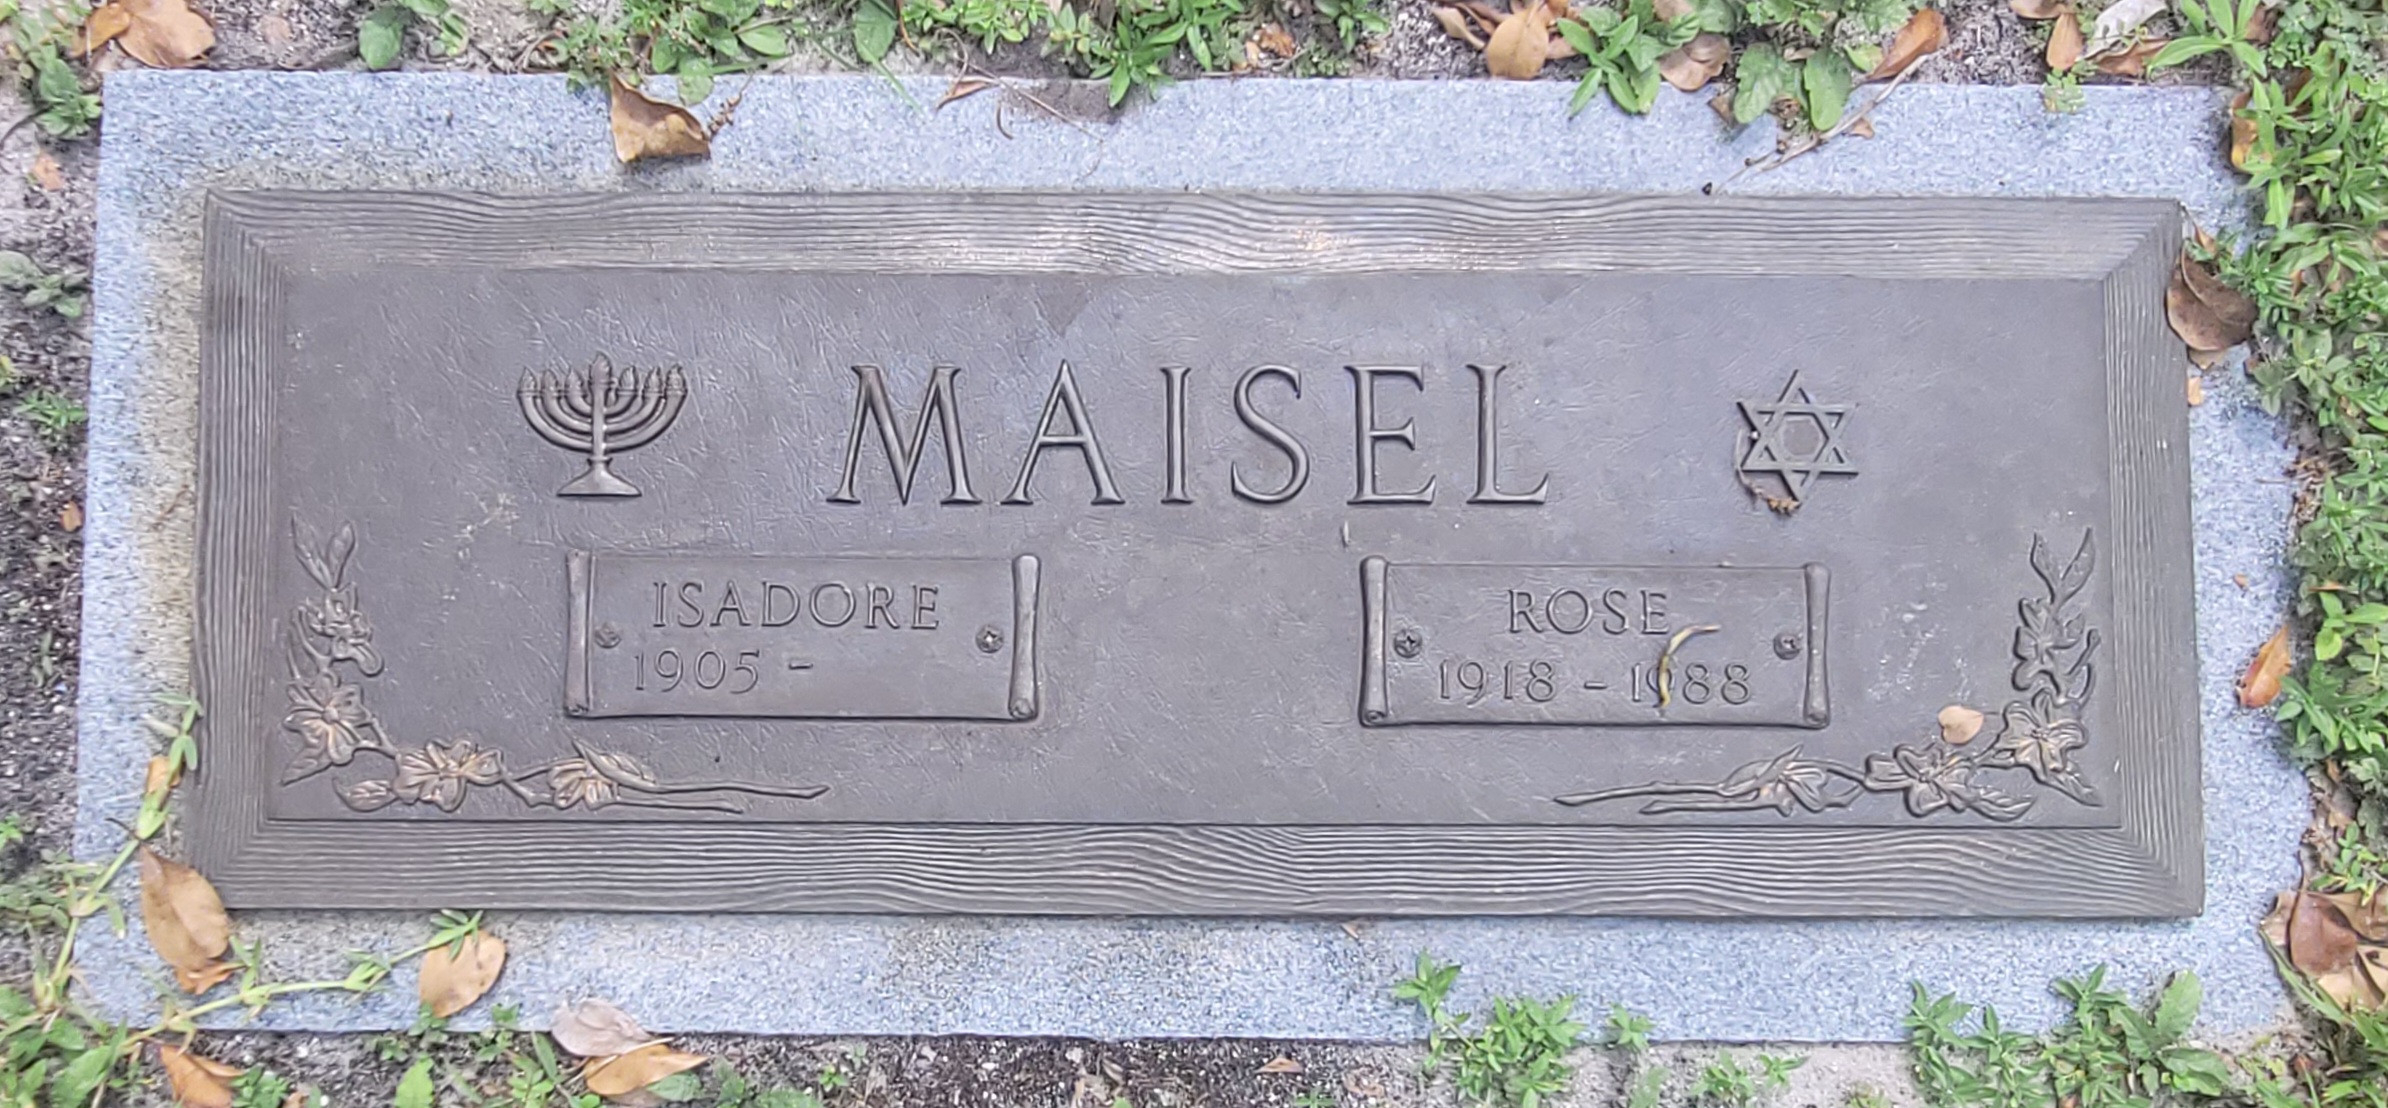 Isadore Maisel